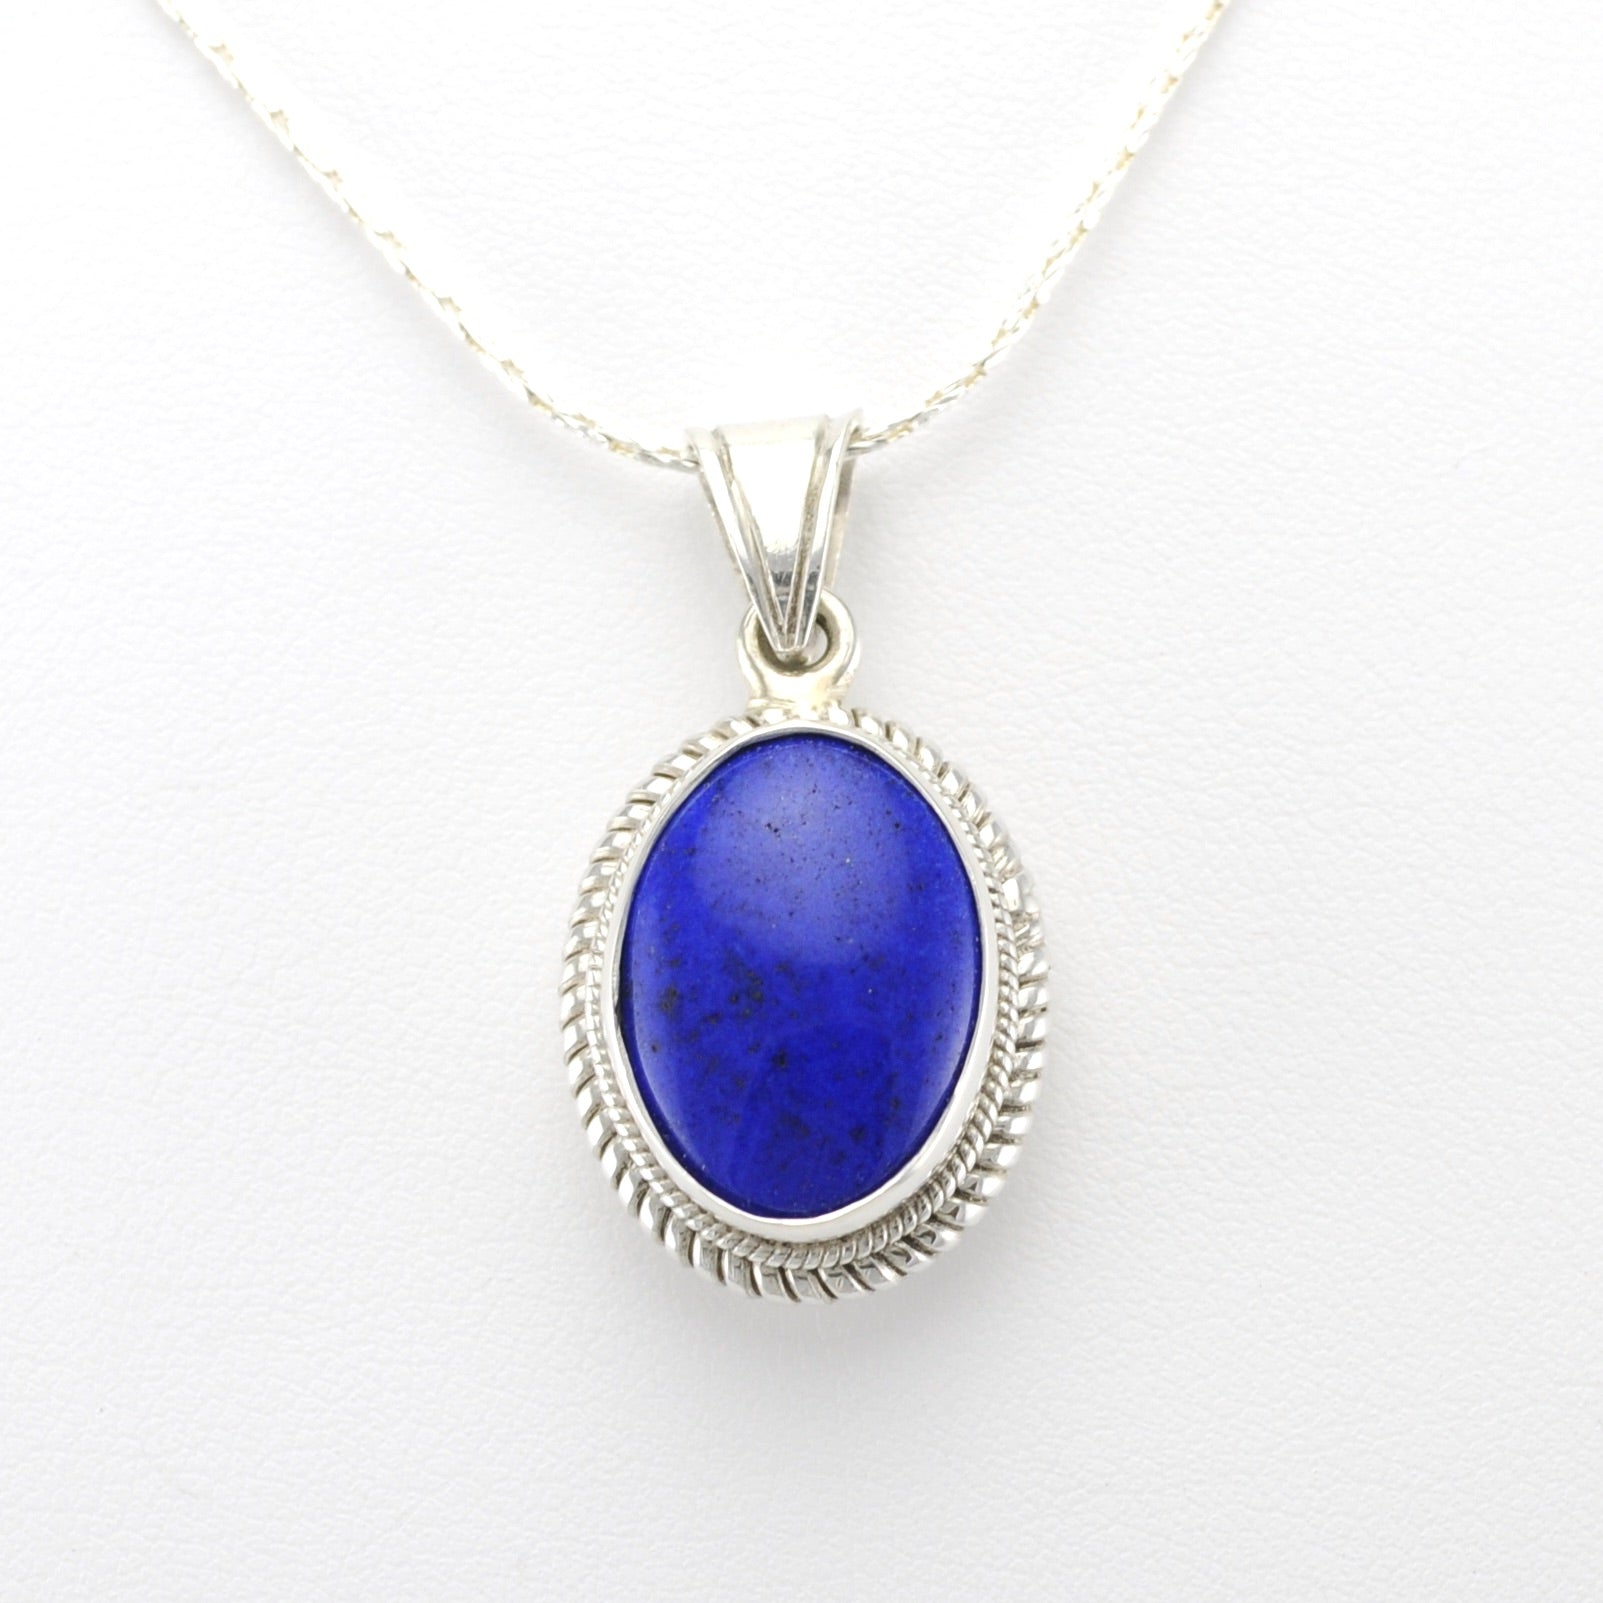 Sterling Silver Lapis Oval Pendant